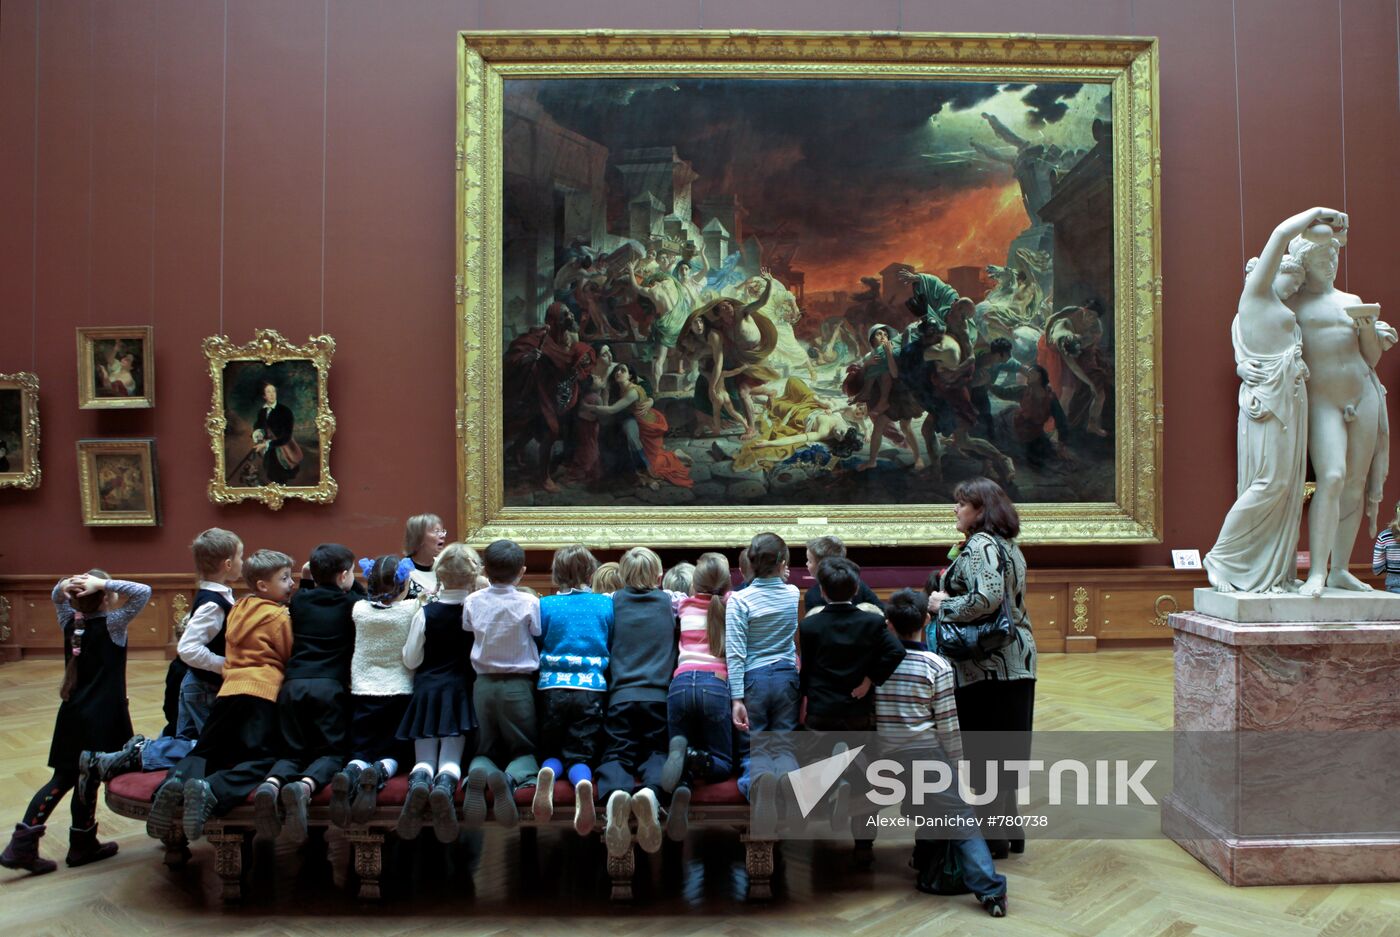 Karl Briullov's "The Last Day of Pompeii" in the Russian Museum